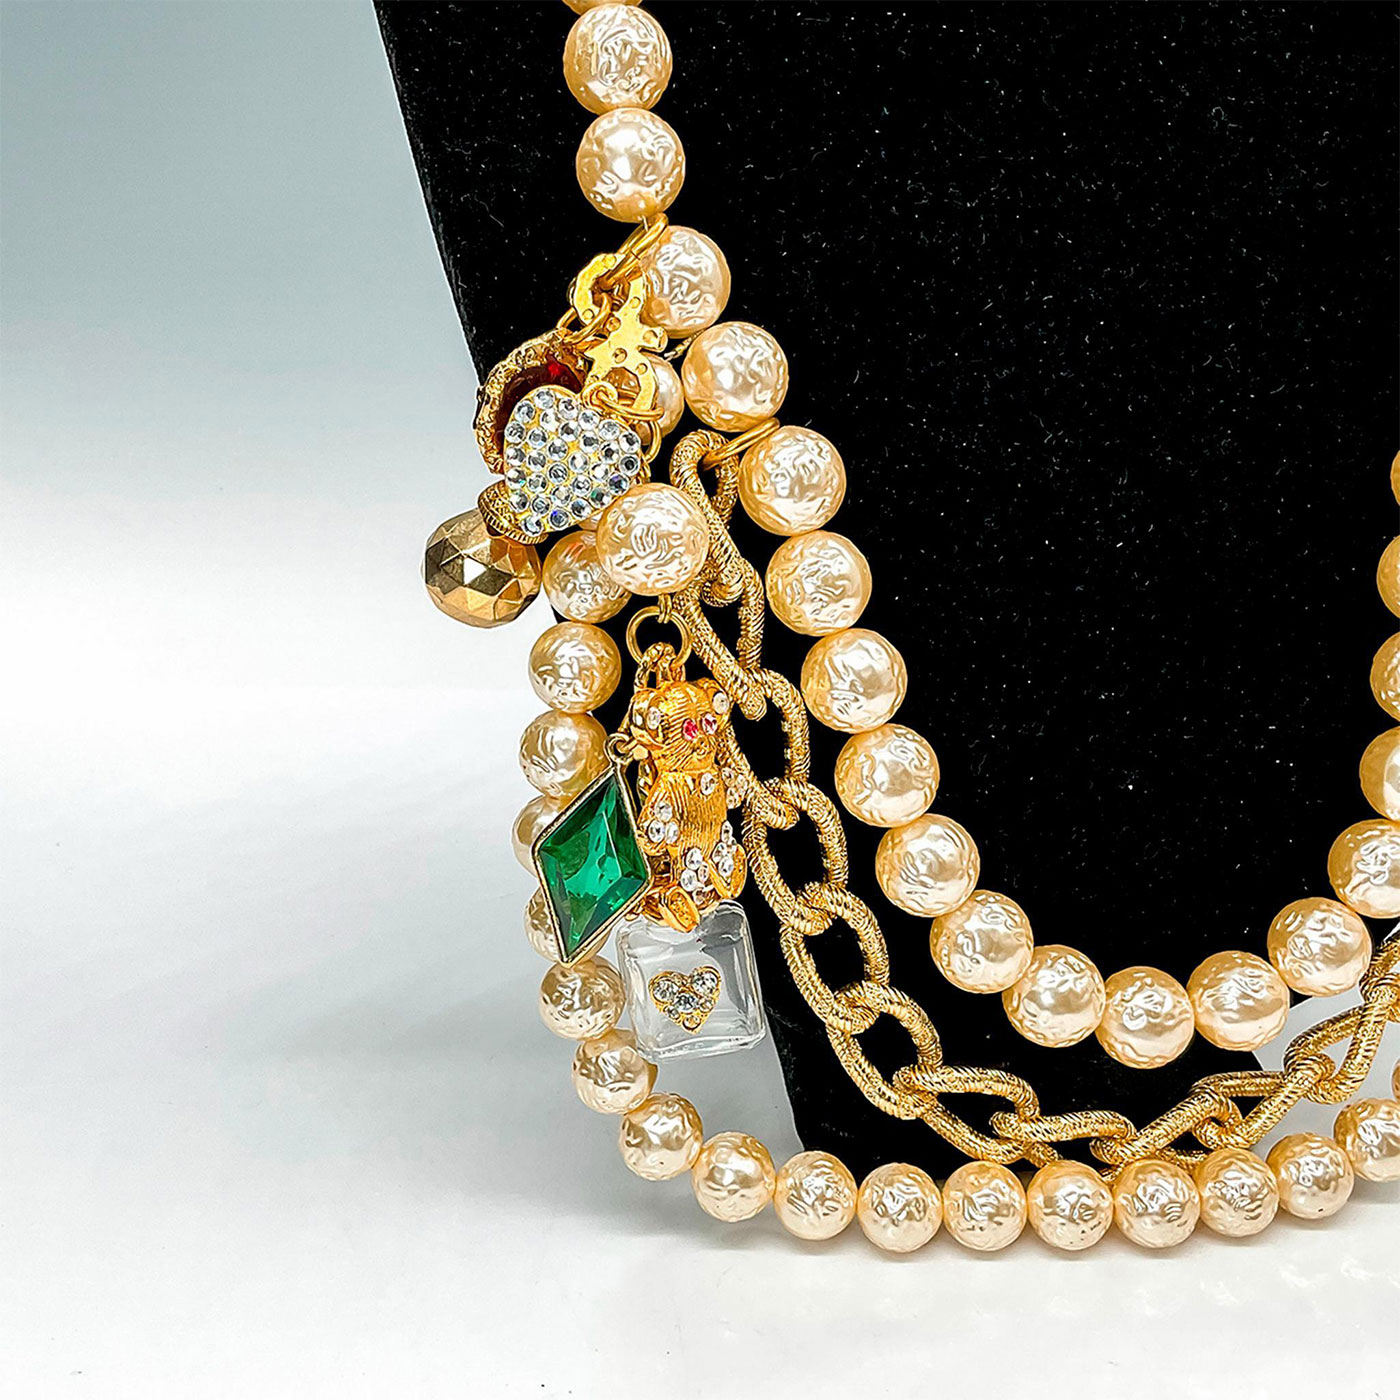 Chanel Inspired Costume Pearl/Gold Chain Necklace w/Charms - Image 2 of 3